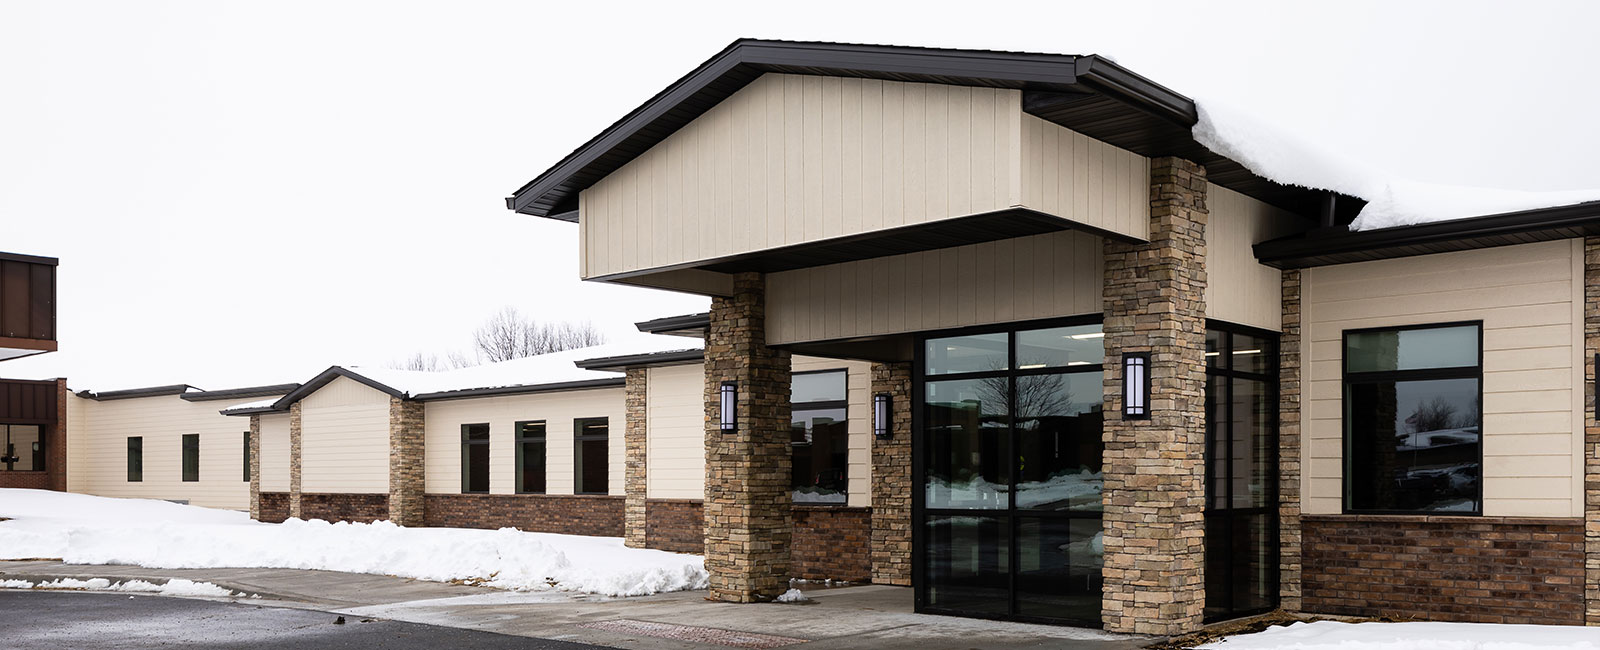 Mercy Medical Coralville